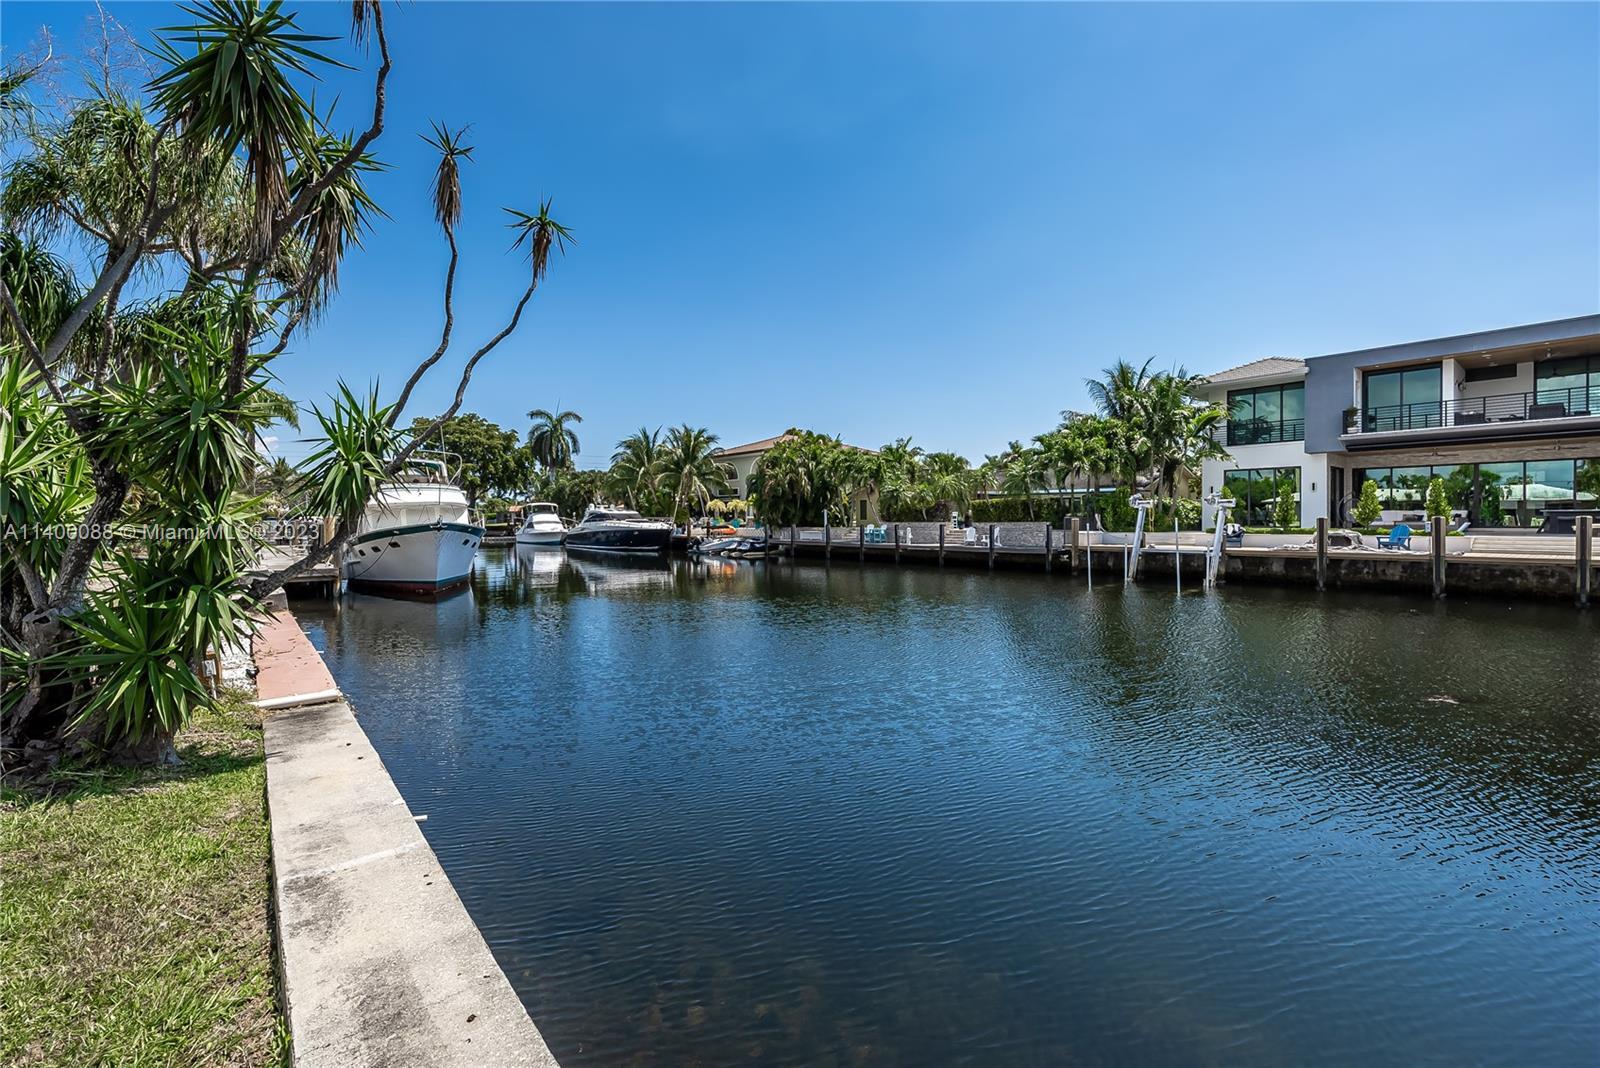 Photo of 3840 NE 23rd Ave in Lighthouse Point, FL